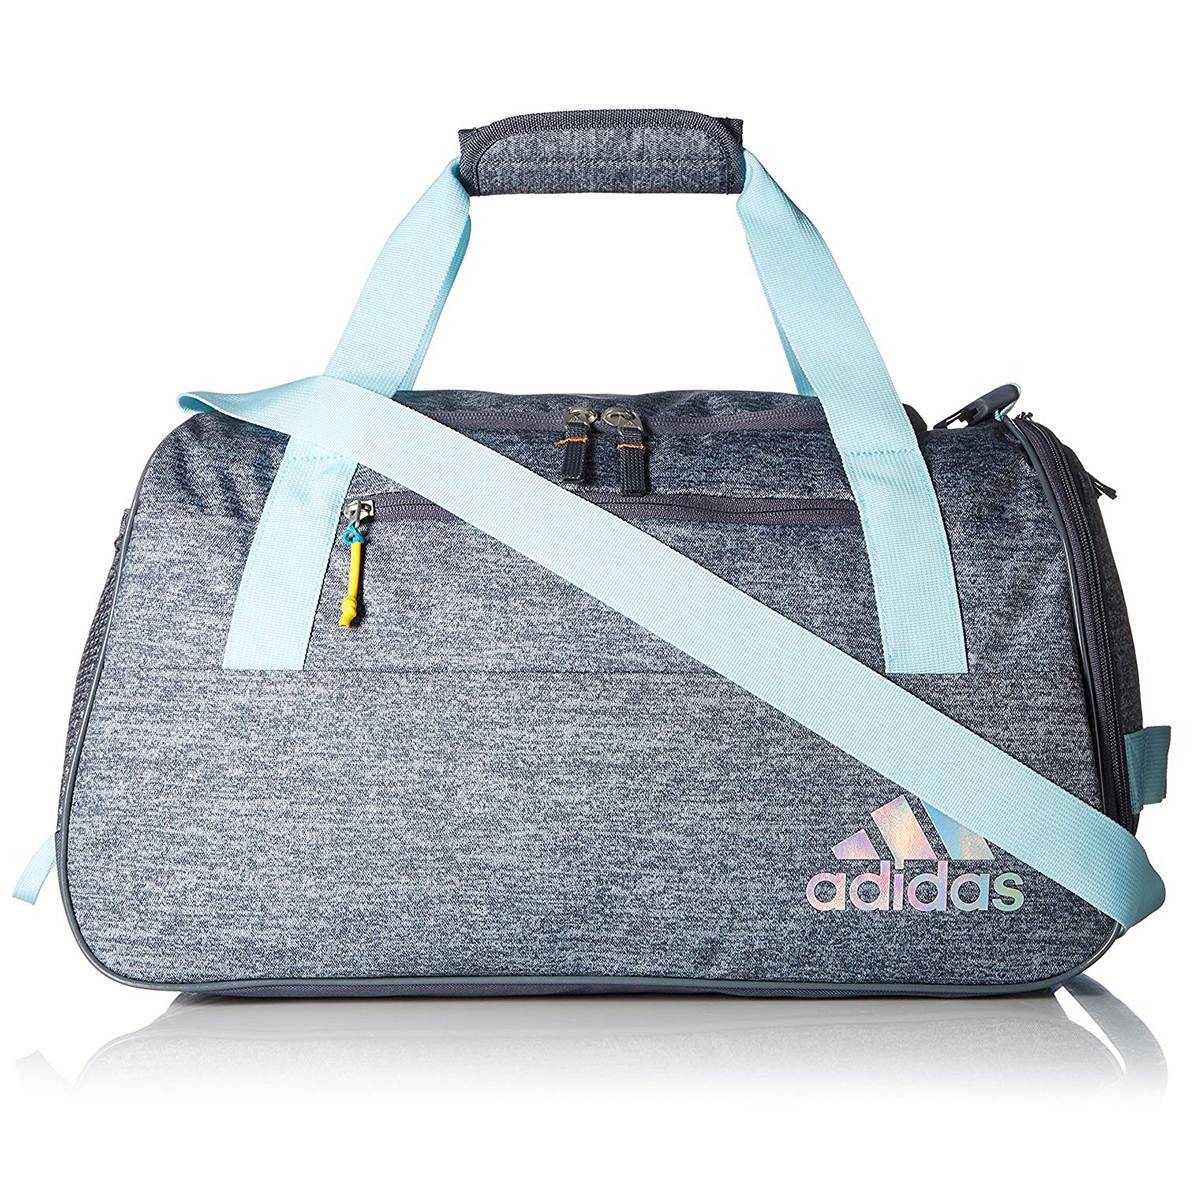 recoger Llave fama This Adidas Gym Bag Is So Cute You'll Want to Carry It Everywhere